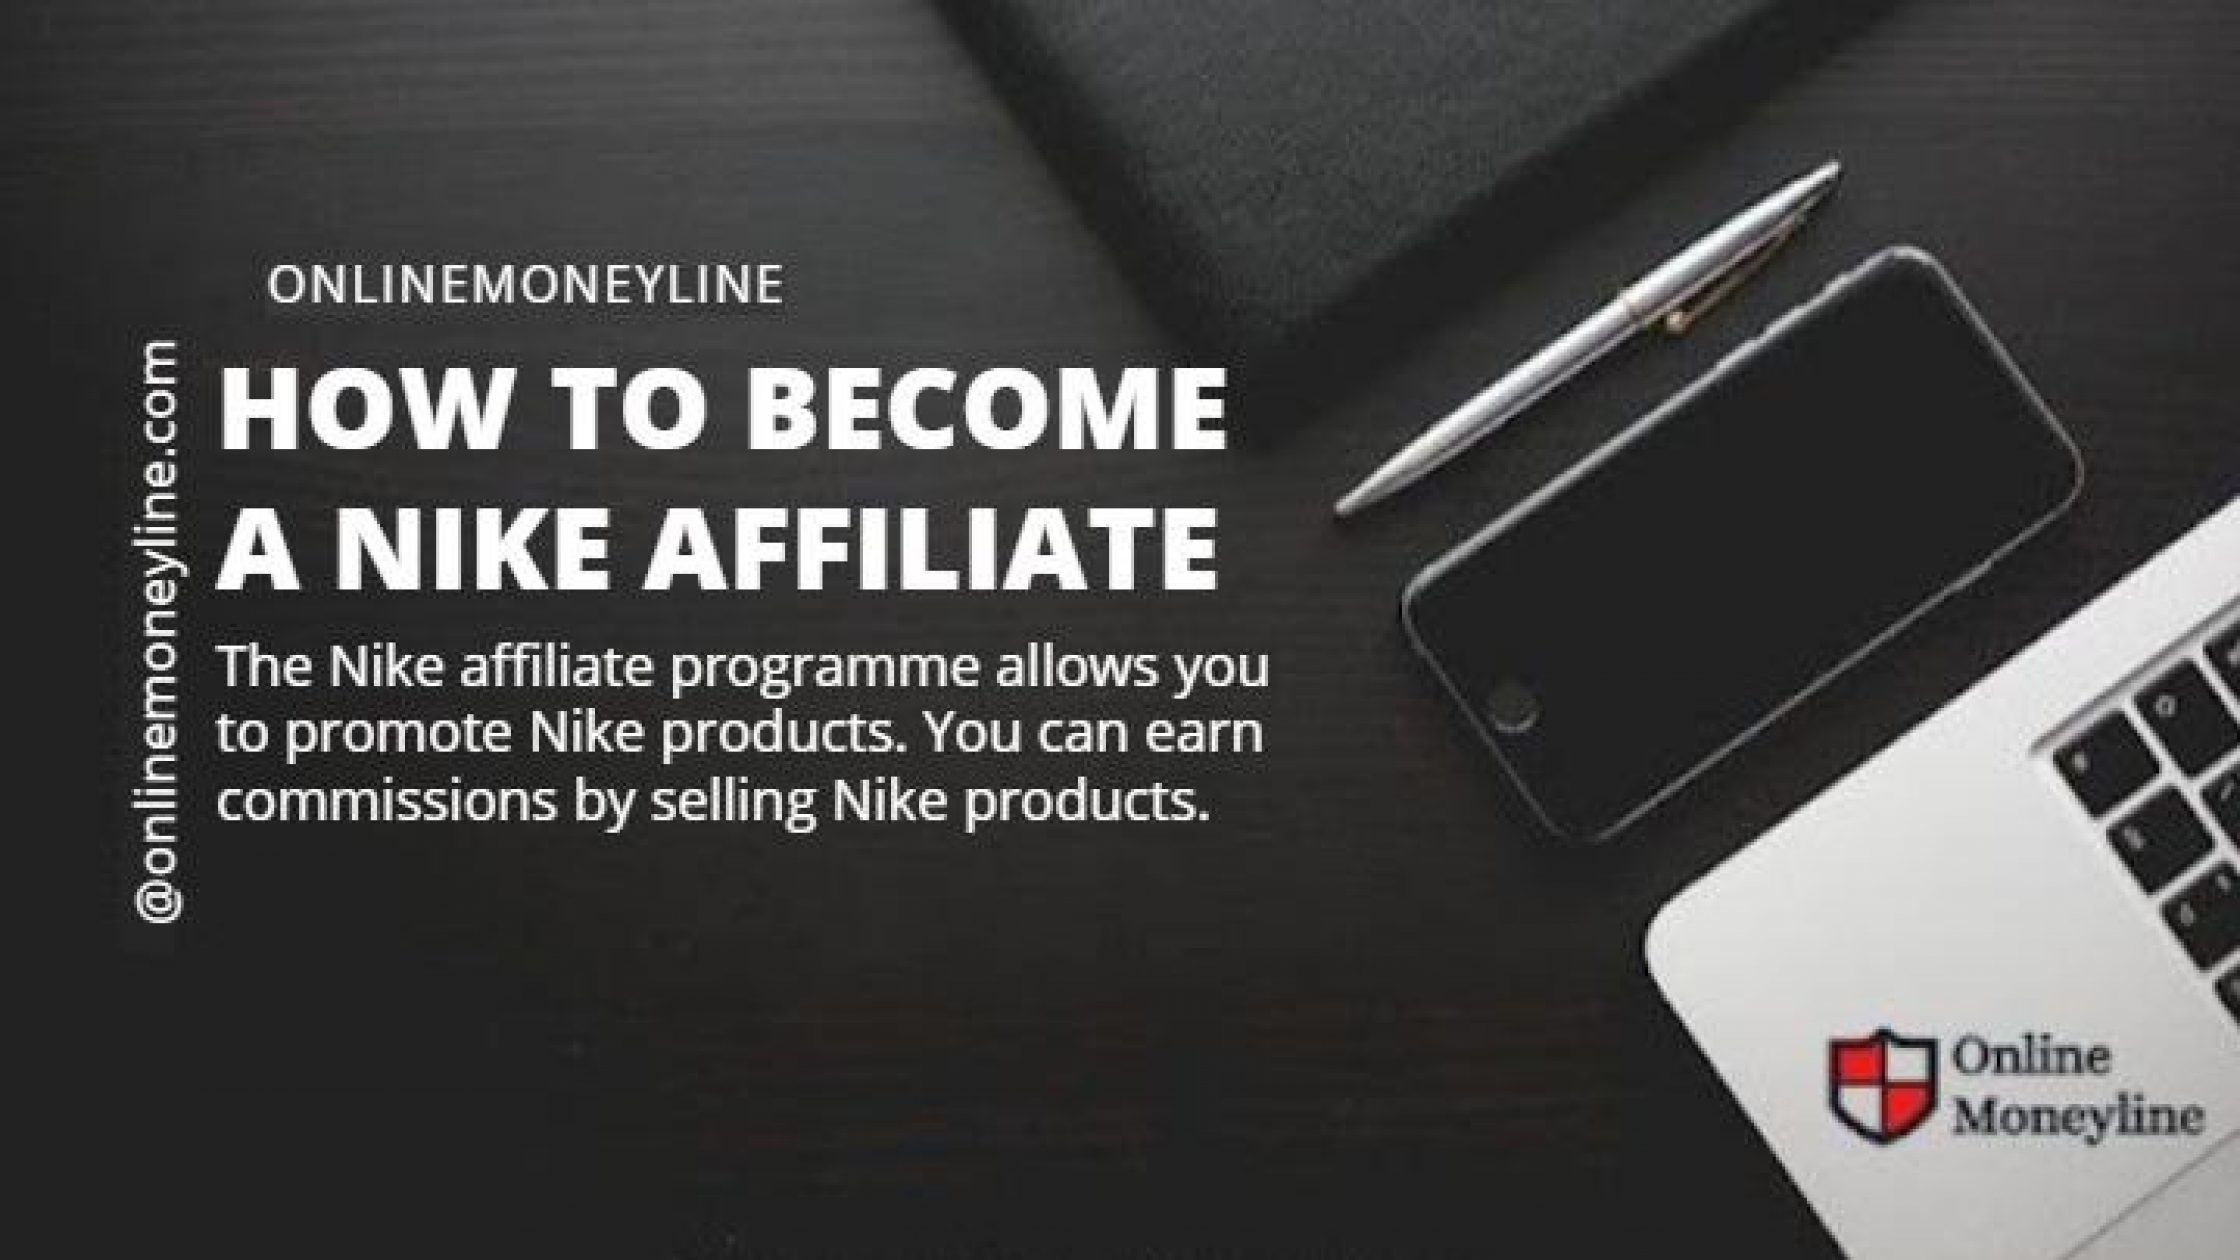 How To Become A Nike Affiliate